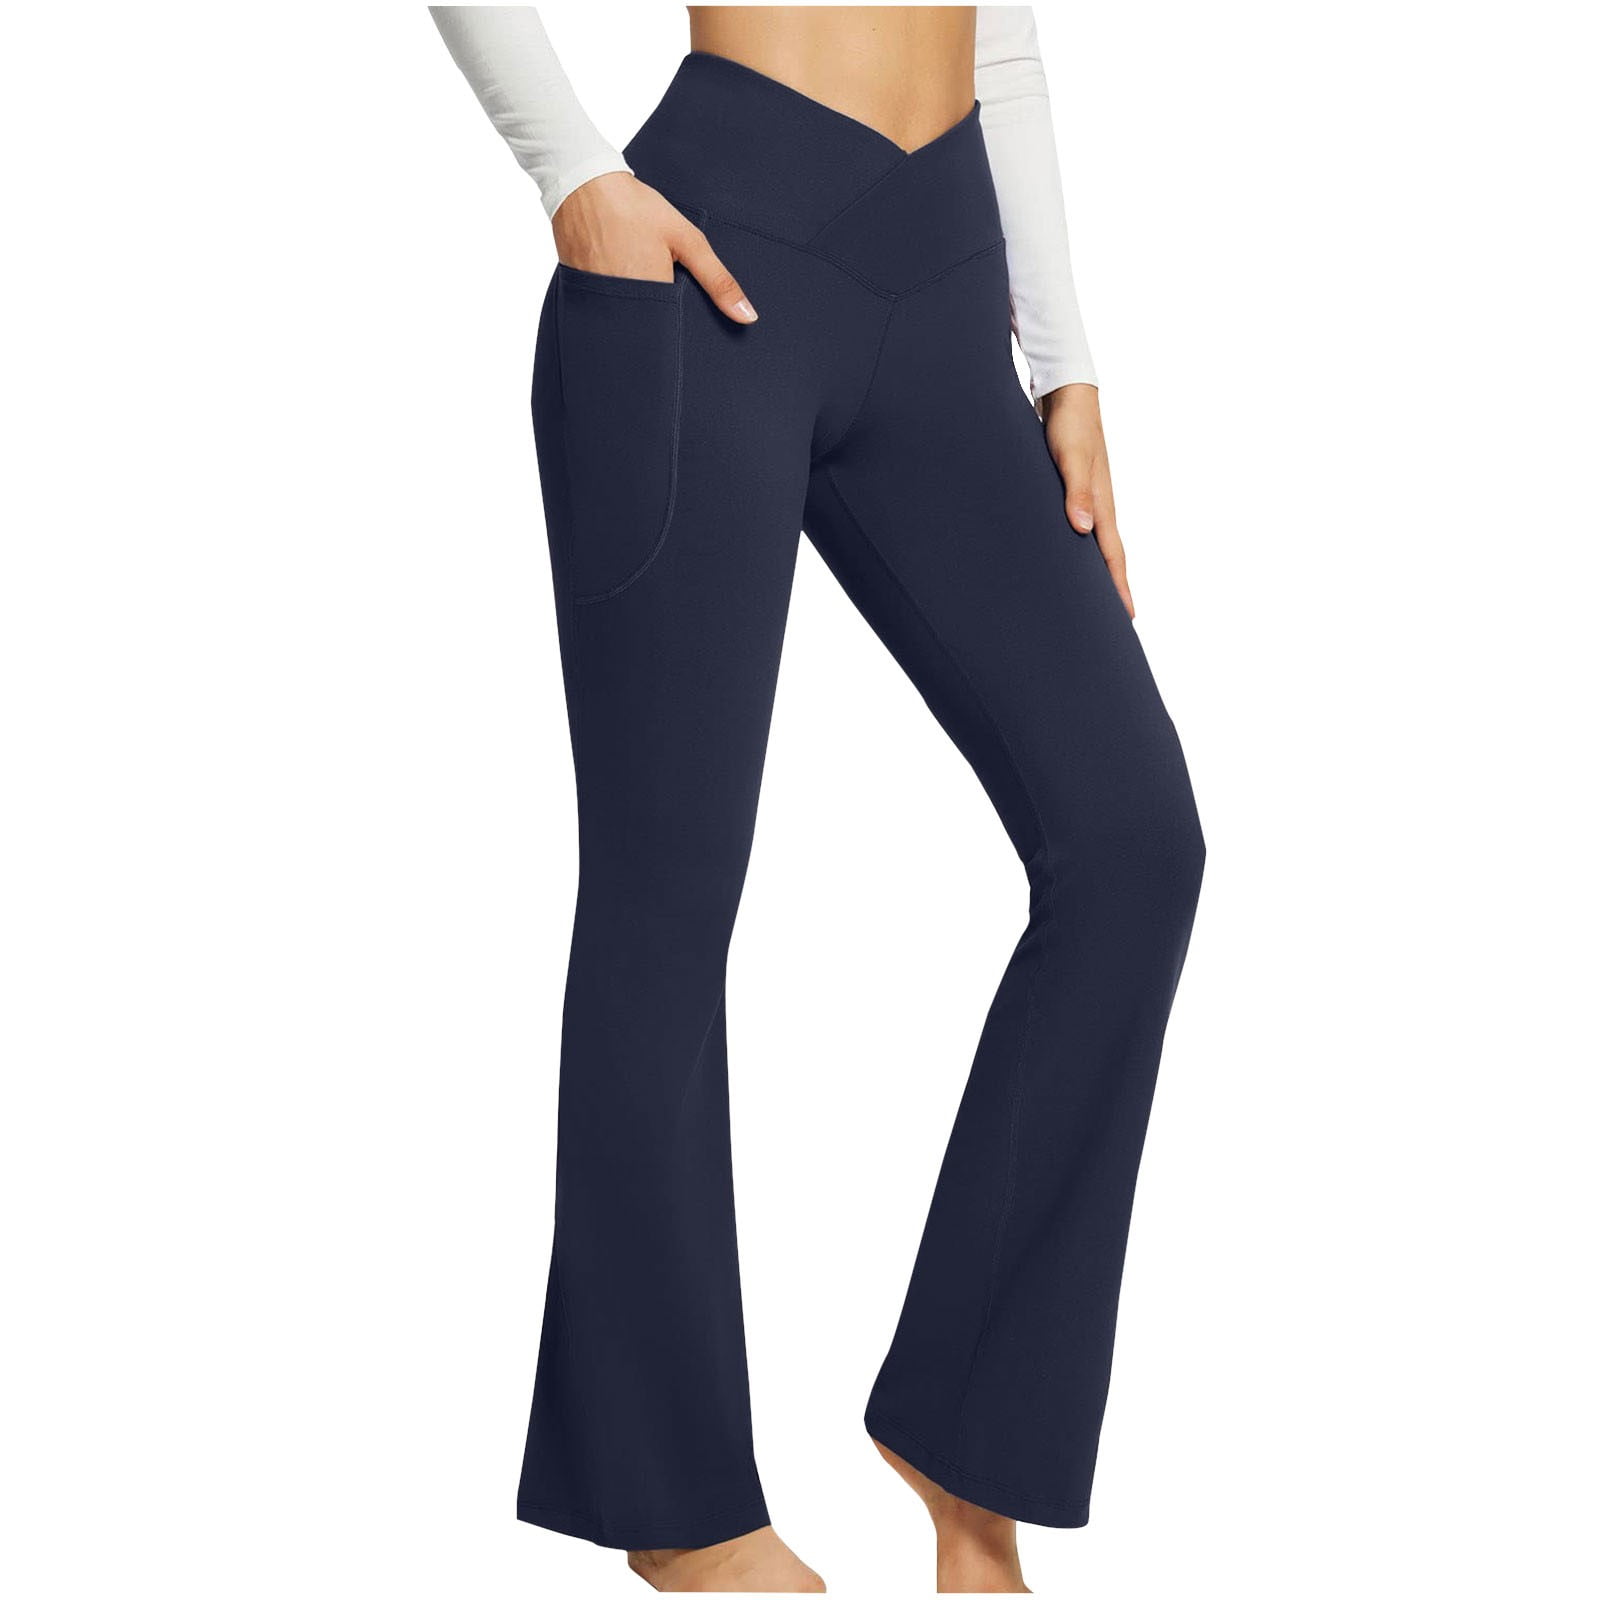 Pants For Women Work Casual Topko European And American Hot Style